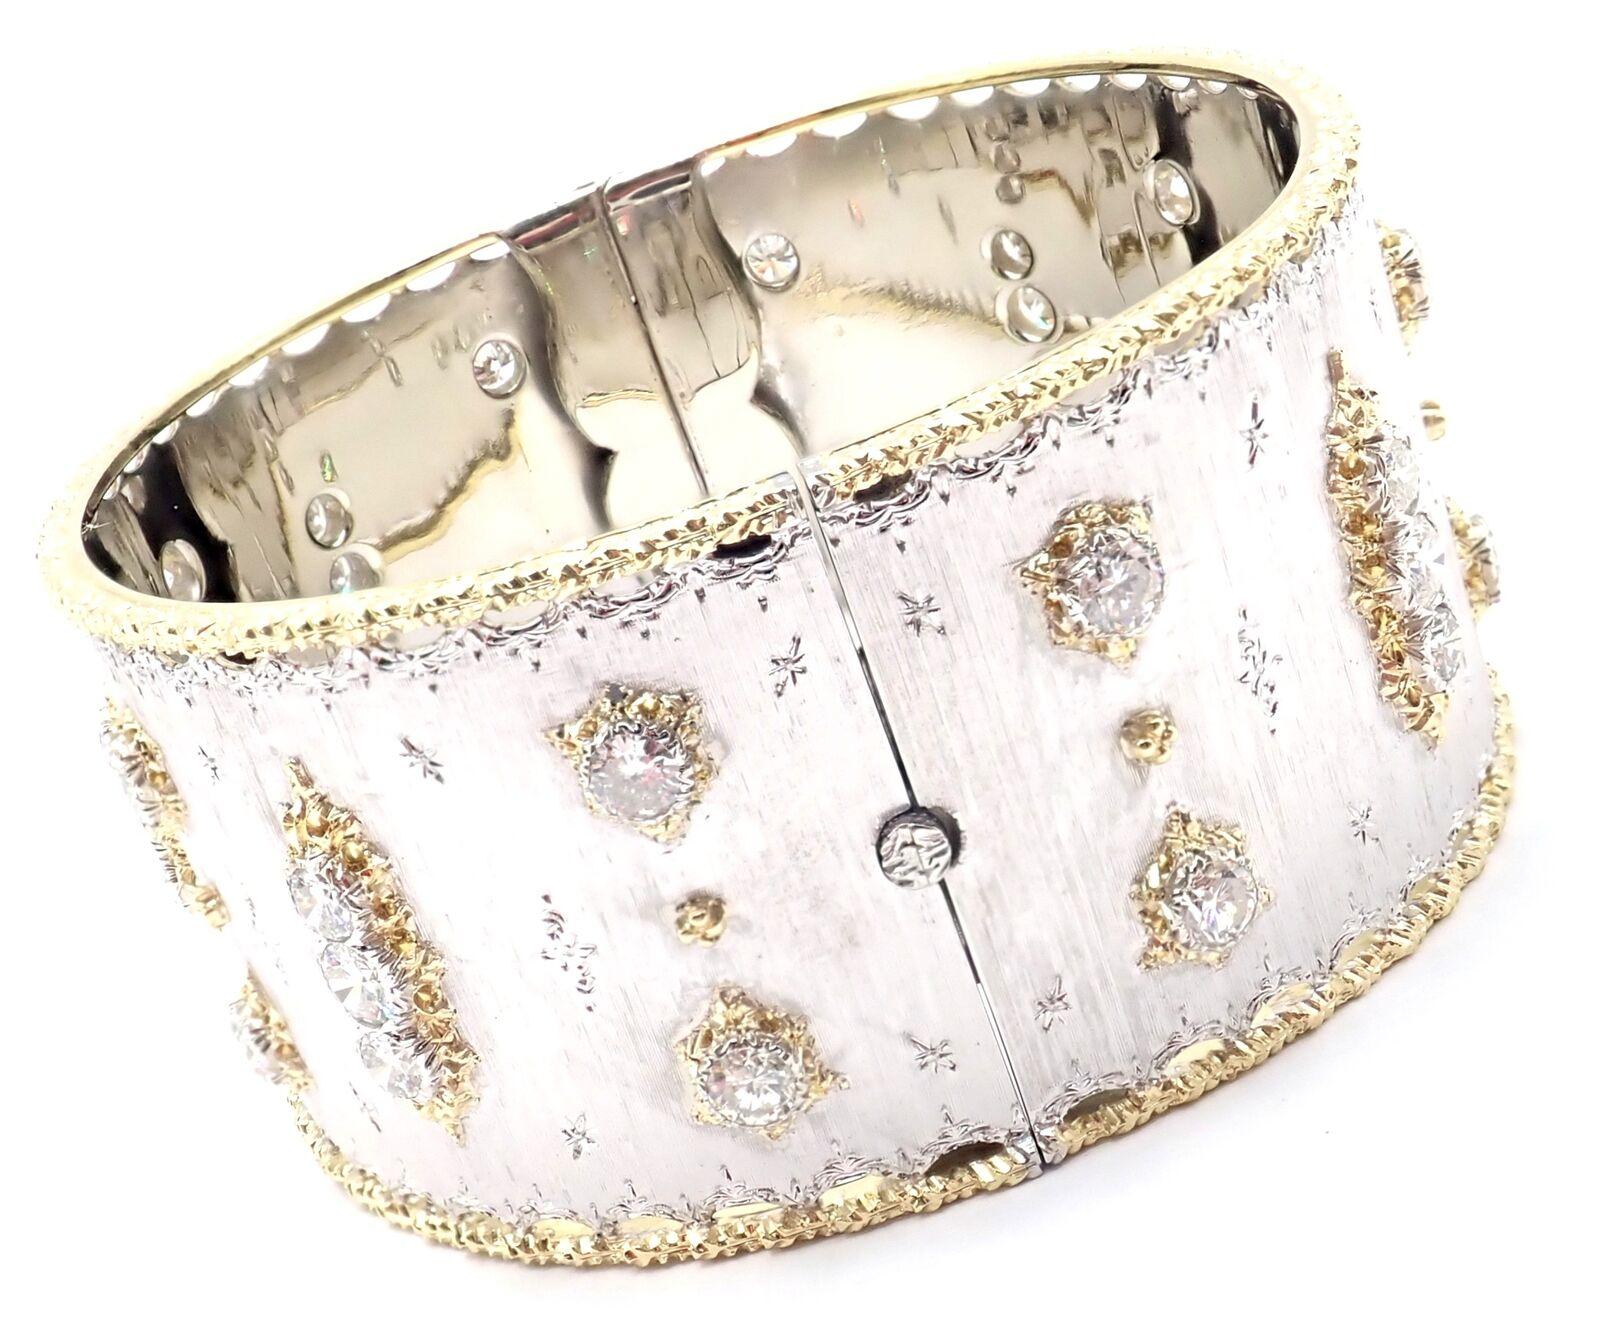 18k Yellow And White Gold Diamond Bangle Bracelet by Buccellati. This bracelet is hand-finished in 18k white gold, and accented by 34 round-cut diamonds set in 18k white gold. Hinged. Handcrafted in Italy by Buccellati. 
With 4 brilliant cut